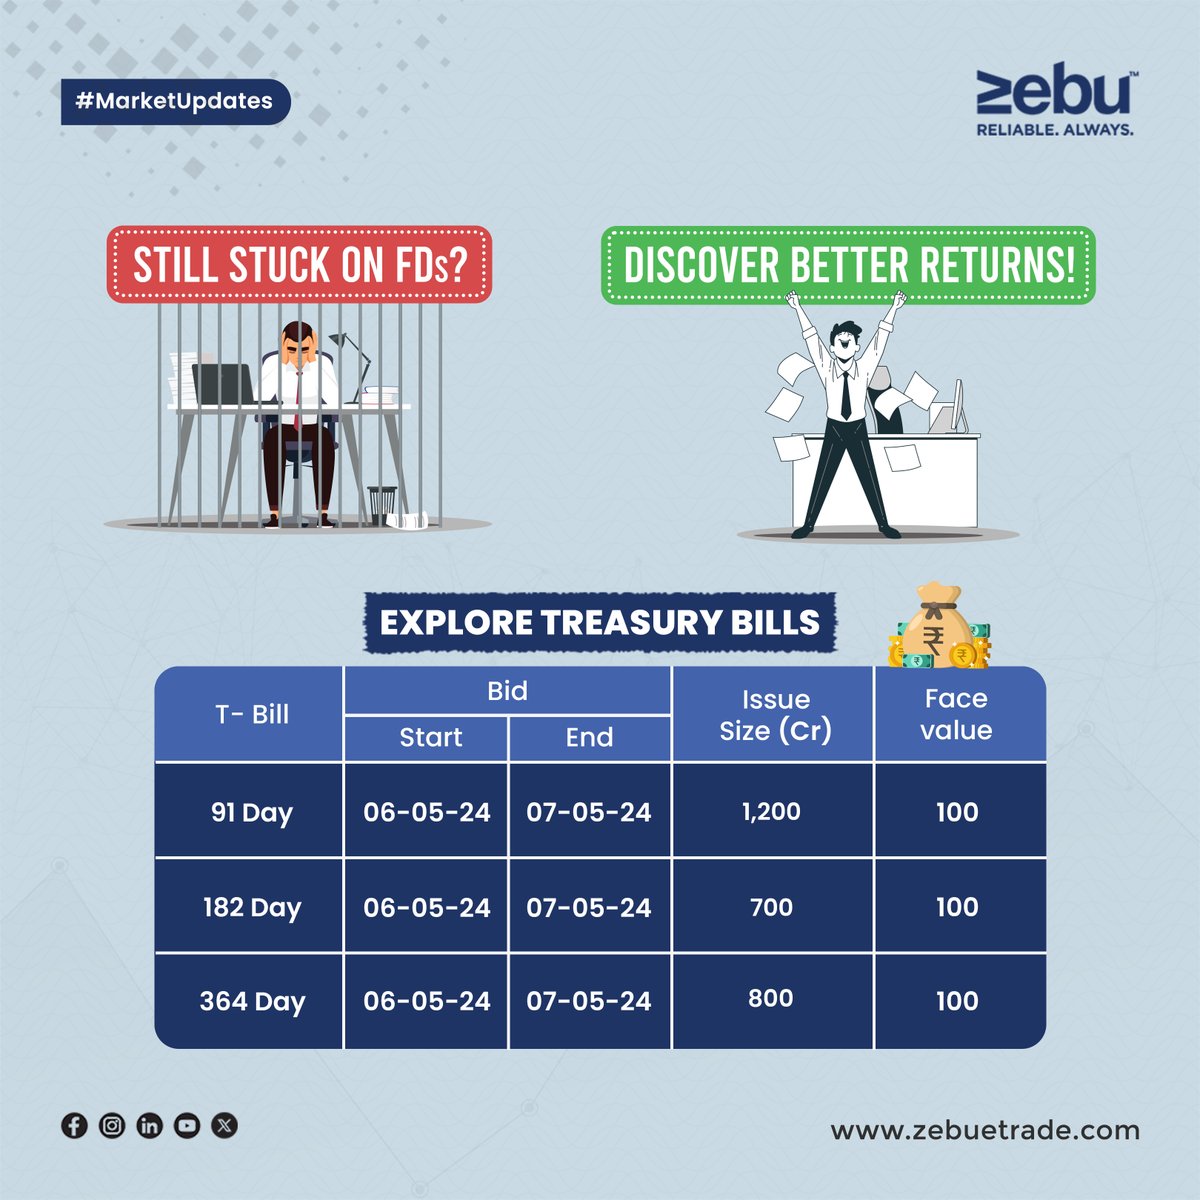 Unlock the secret to financial peace with Treasury Bills - where safety meets growth. Invest wisely, rest assured.

Apply Now : in.zebull.in/tbill

#simplifywithmynt #zebu #financialfreedom #stockmarketinvestment #TreasuryBills #Investing #FinancialSecurity #tbills